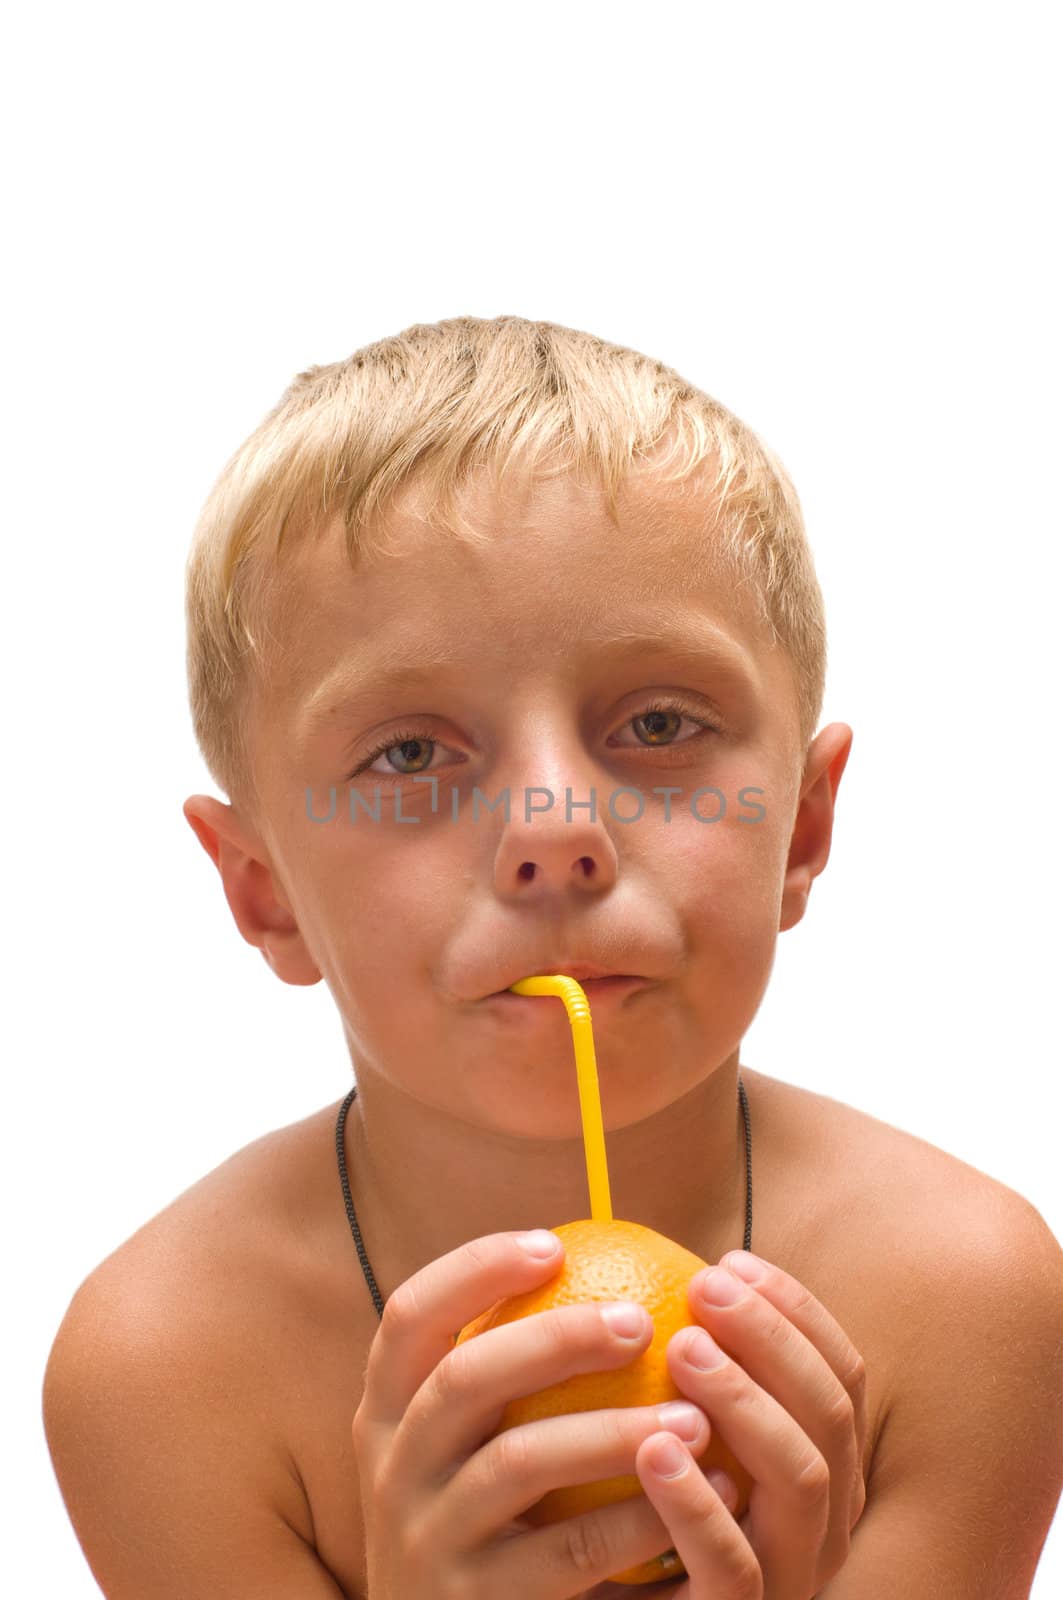 The boy drank the juice from an orange through a straw is isolated on a white background.